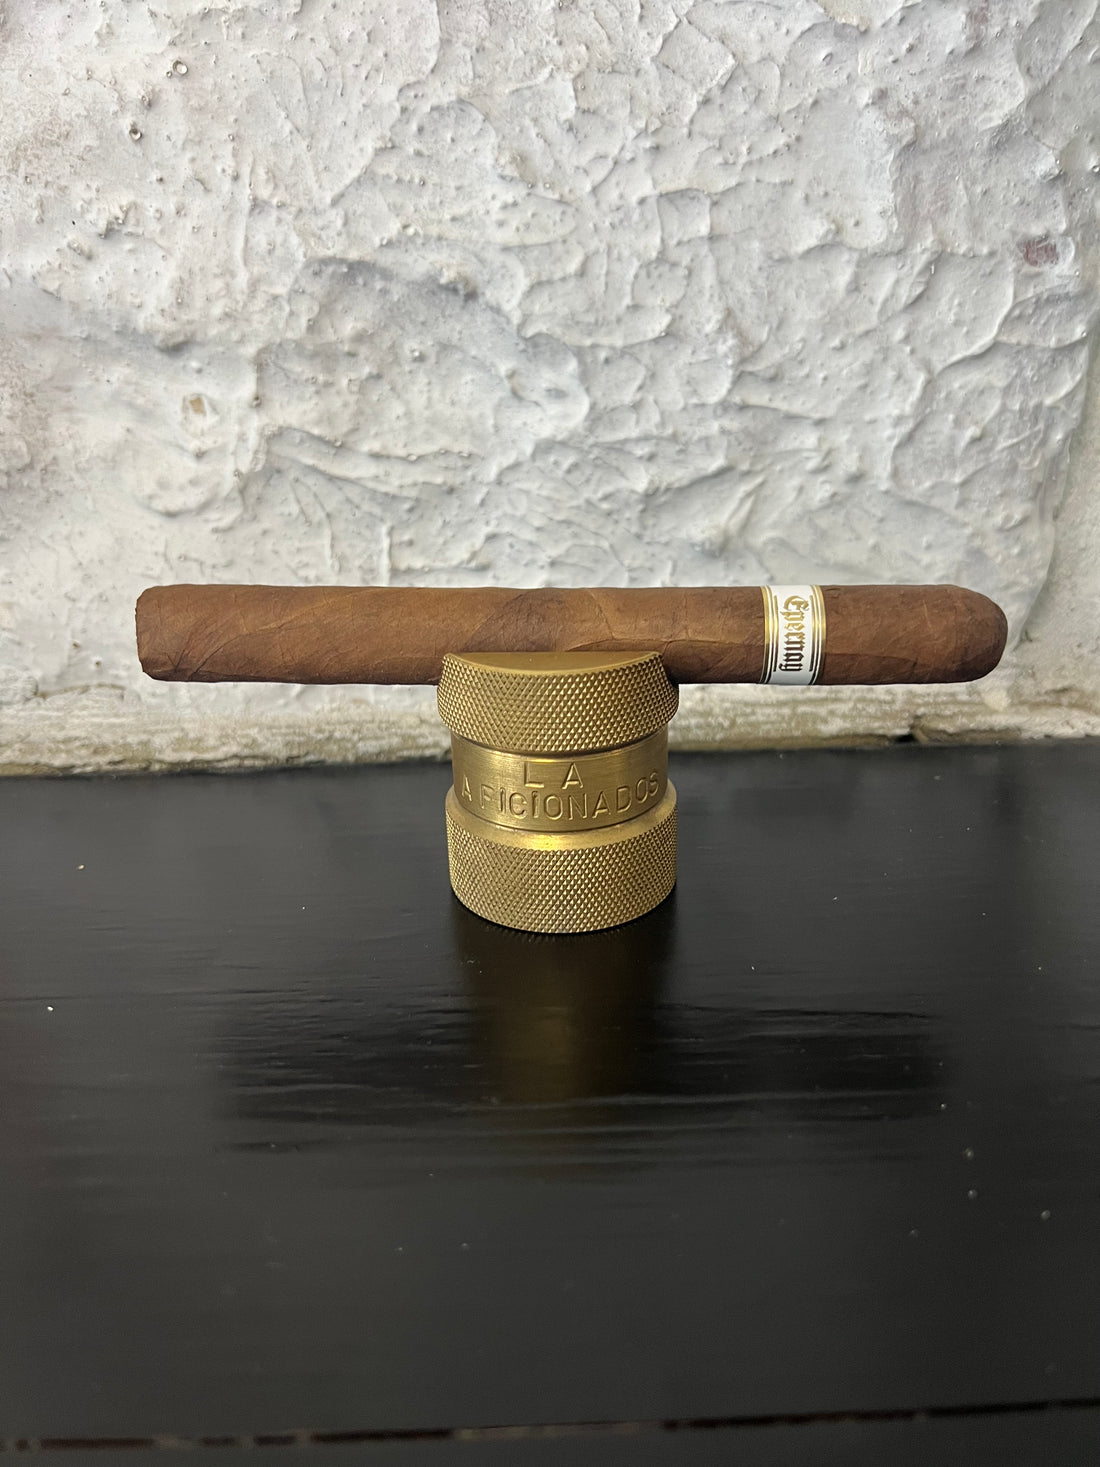 The Illusione Epernay Le Grande